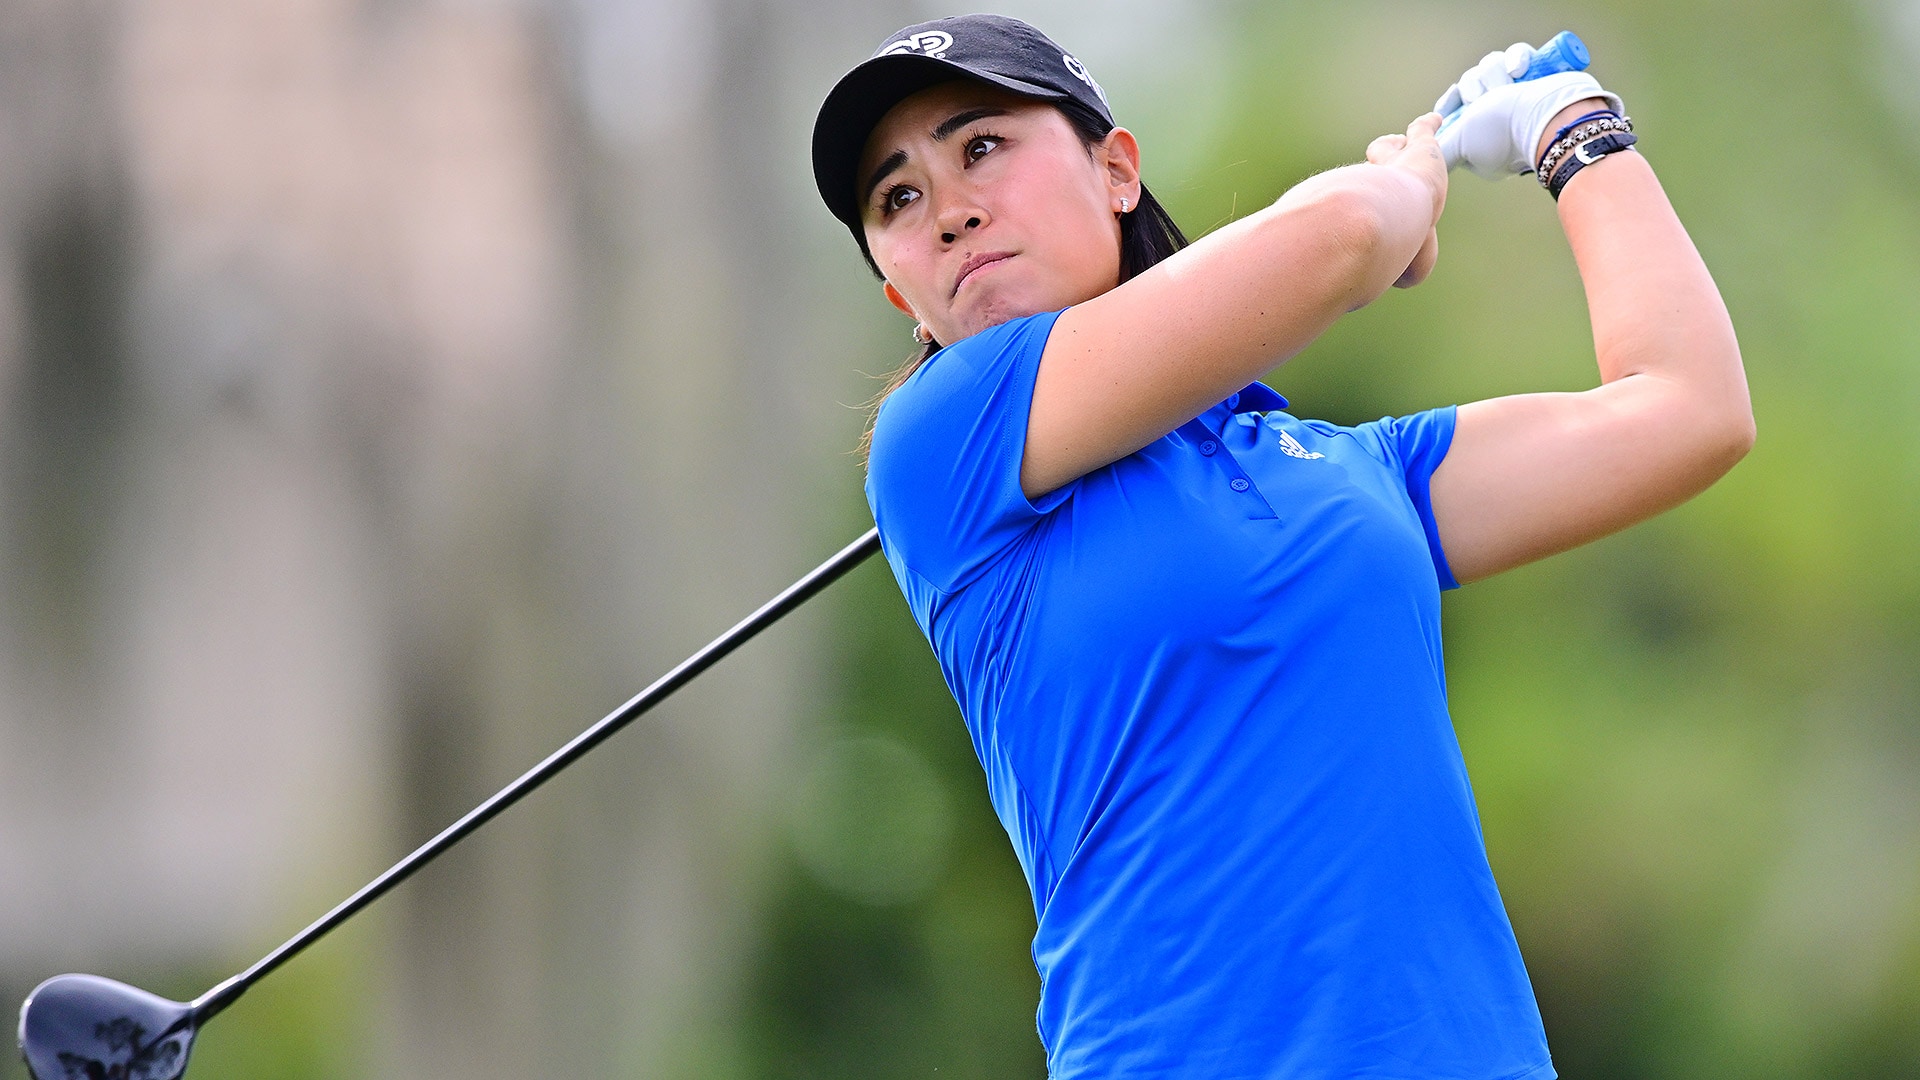 Danielle Kang slam-dunk ace rejected, but she still leads in bid for back-to-back wins